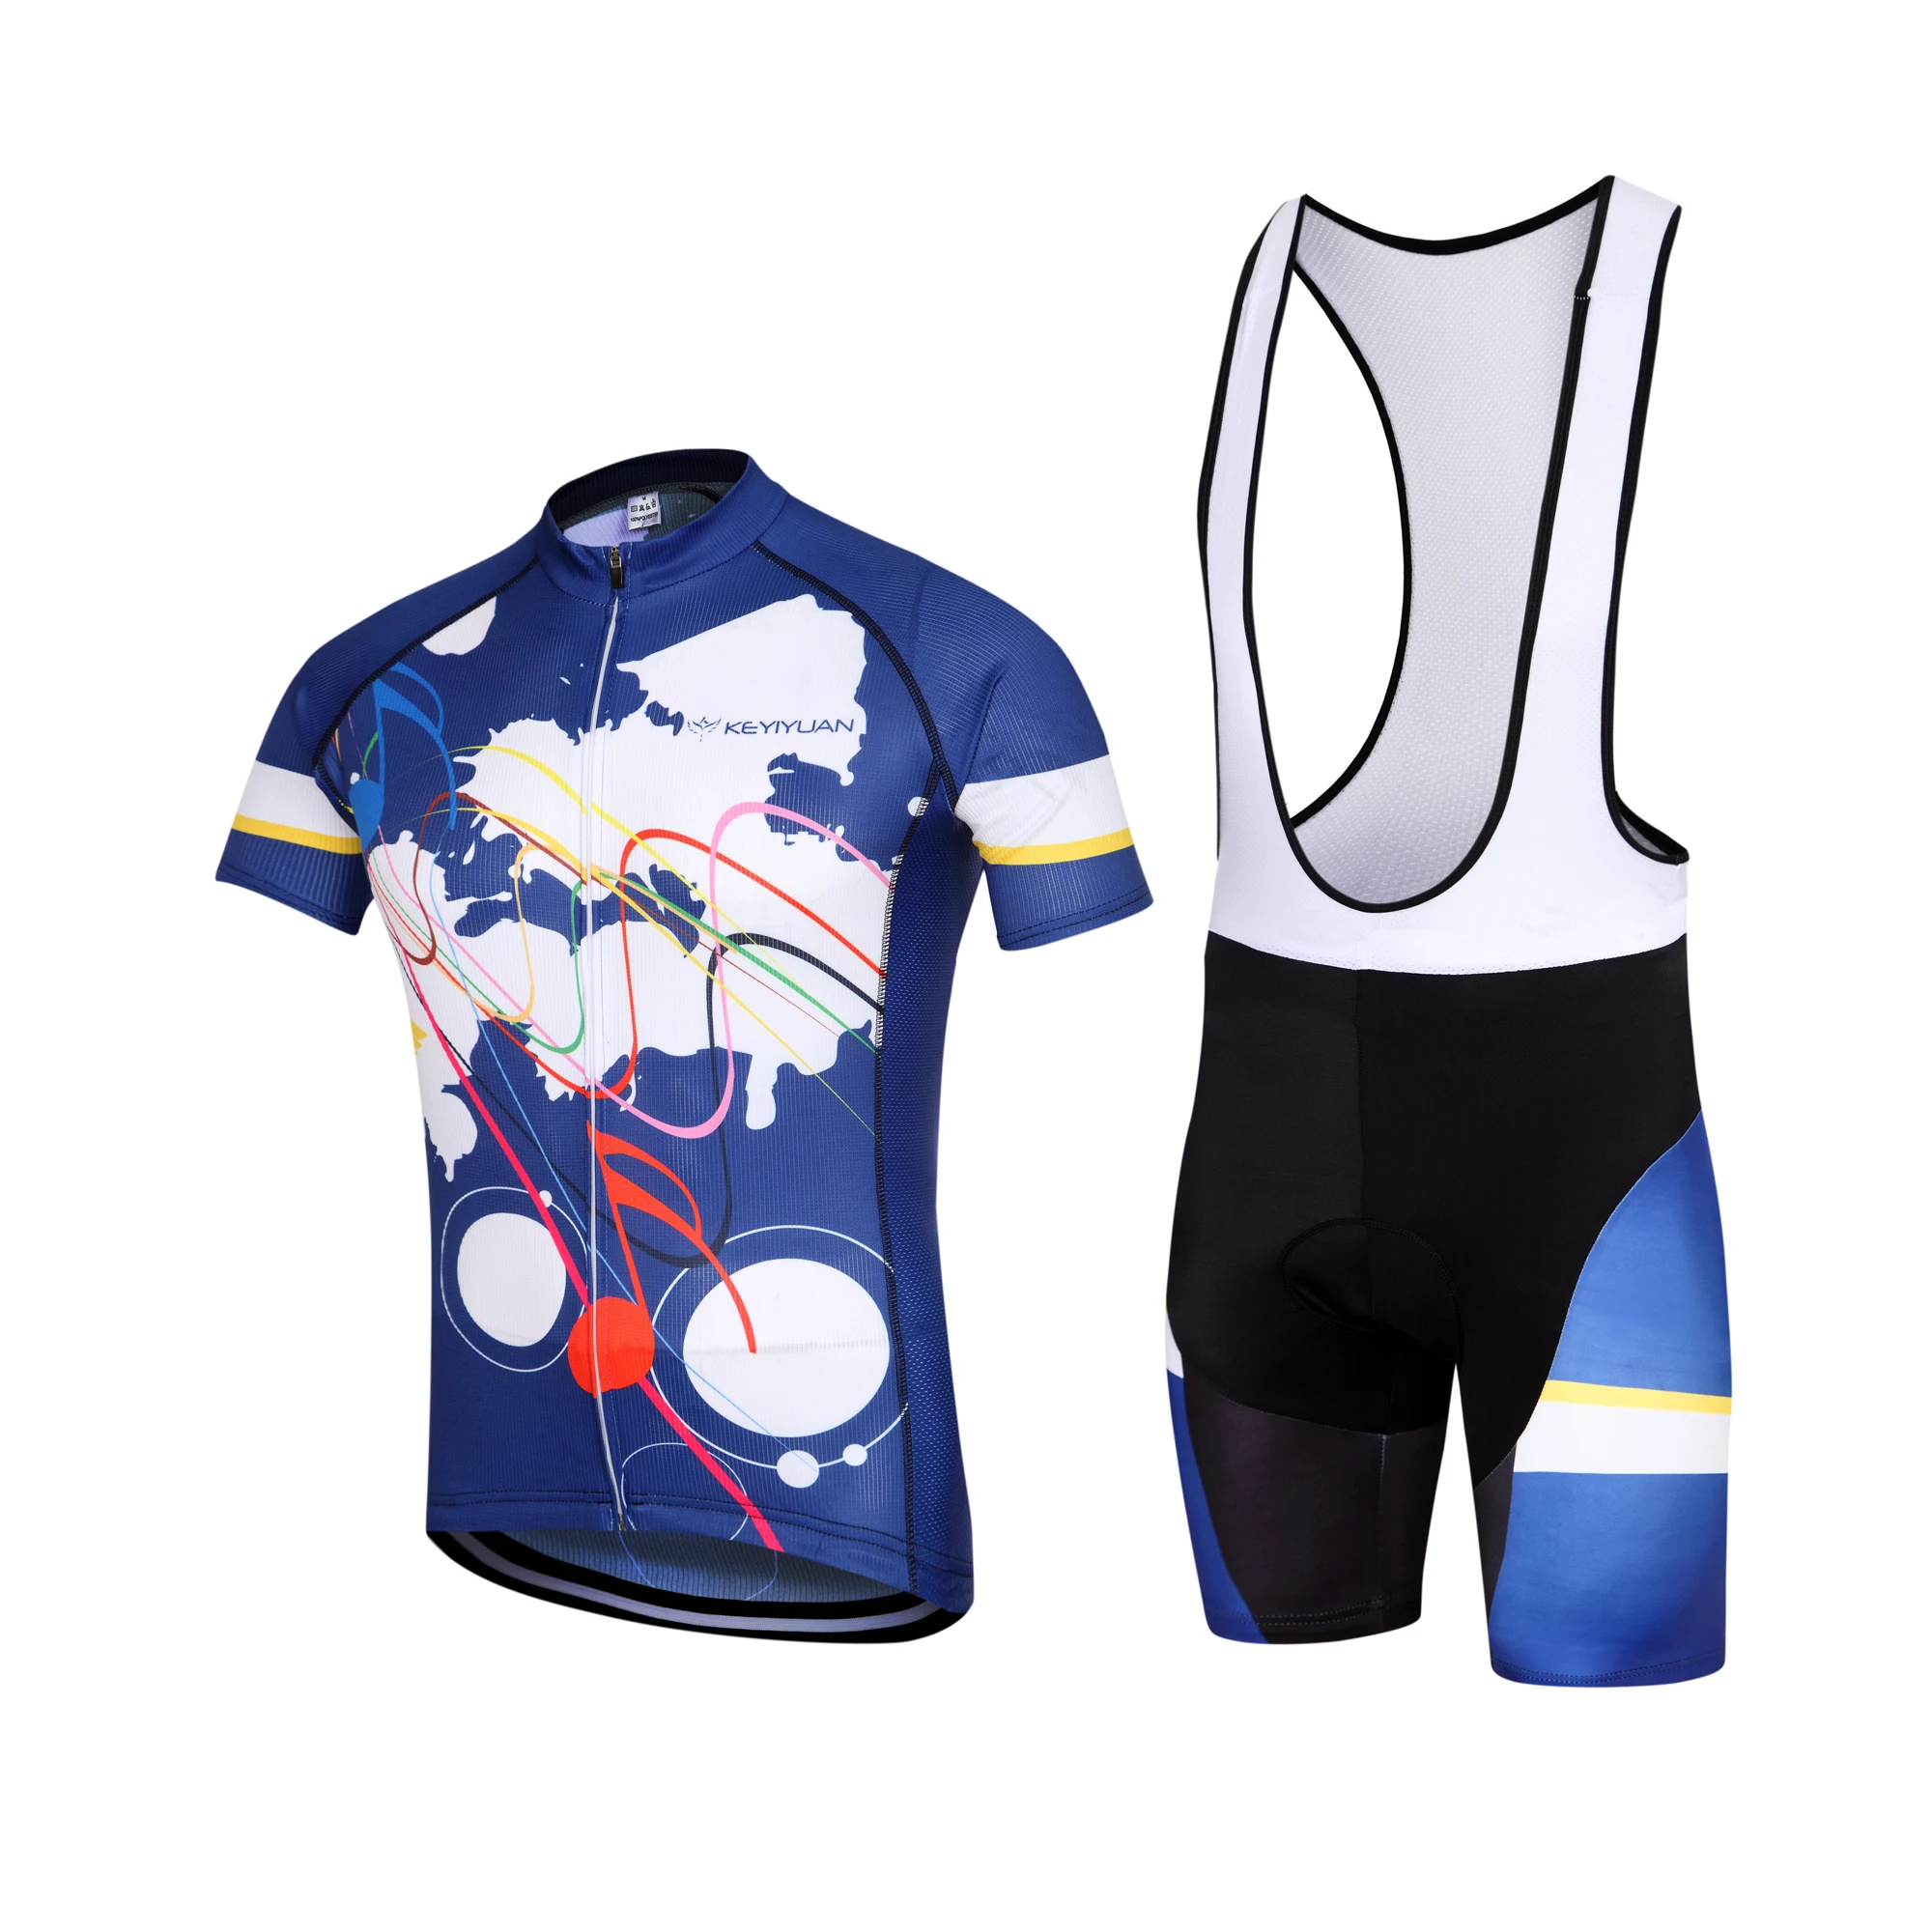 

KEYIYUAN 2023 New Short Sleeve Cycling Jersey Suit Bicycle Clothing Set Mtb Bike Wear Tenue Velo Homme Roupa Ciclista Masculino